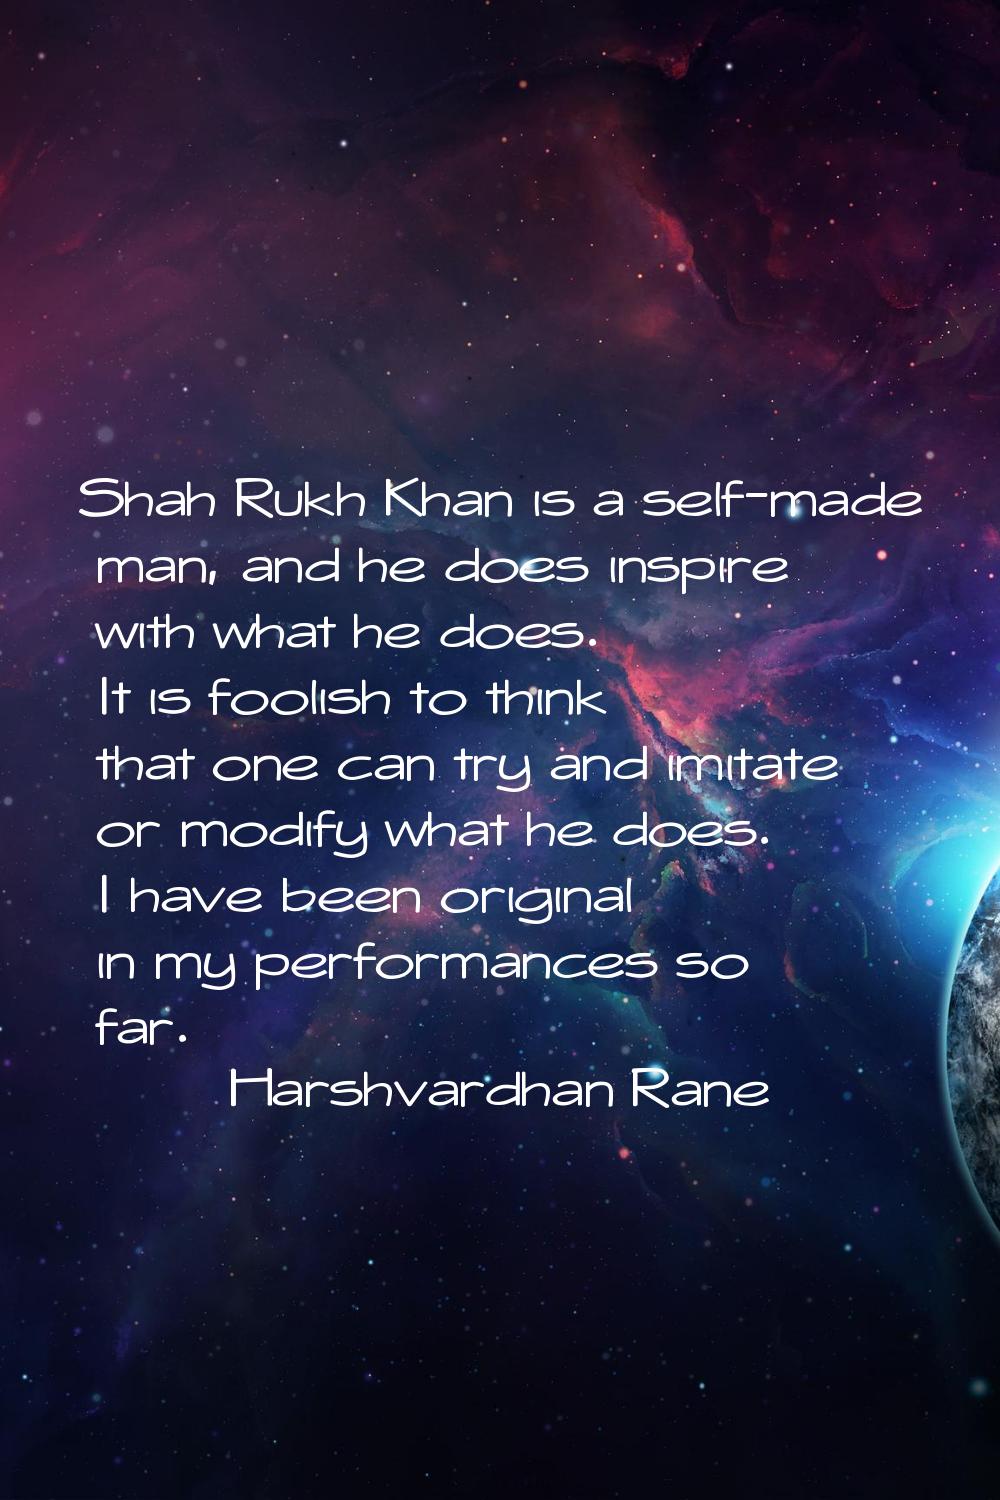 Shah Rukh Khan is a self-made man, and he does inspire with what he does. It is foolish to think th